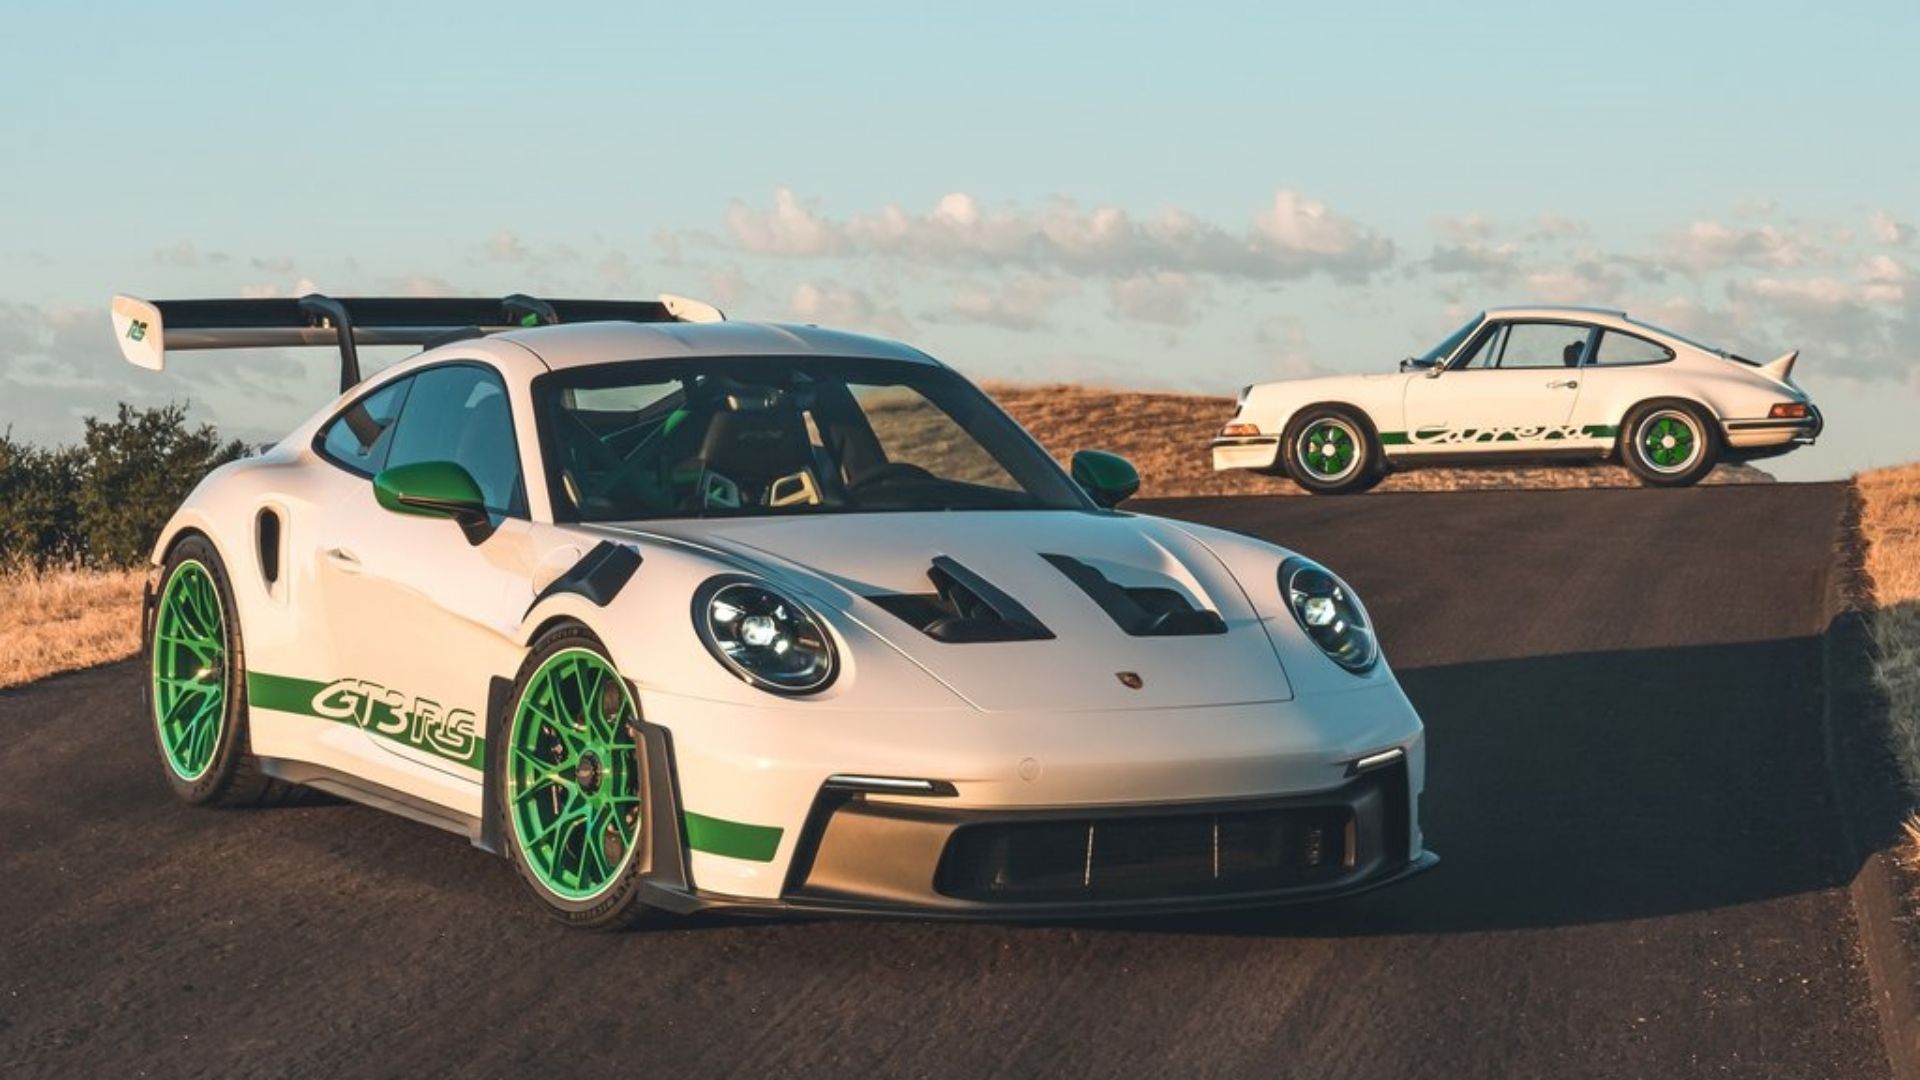 White and green Porsche 911 GT3 RS